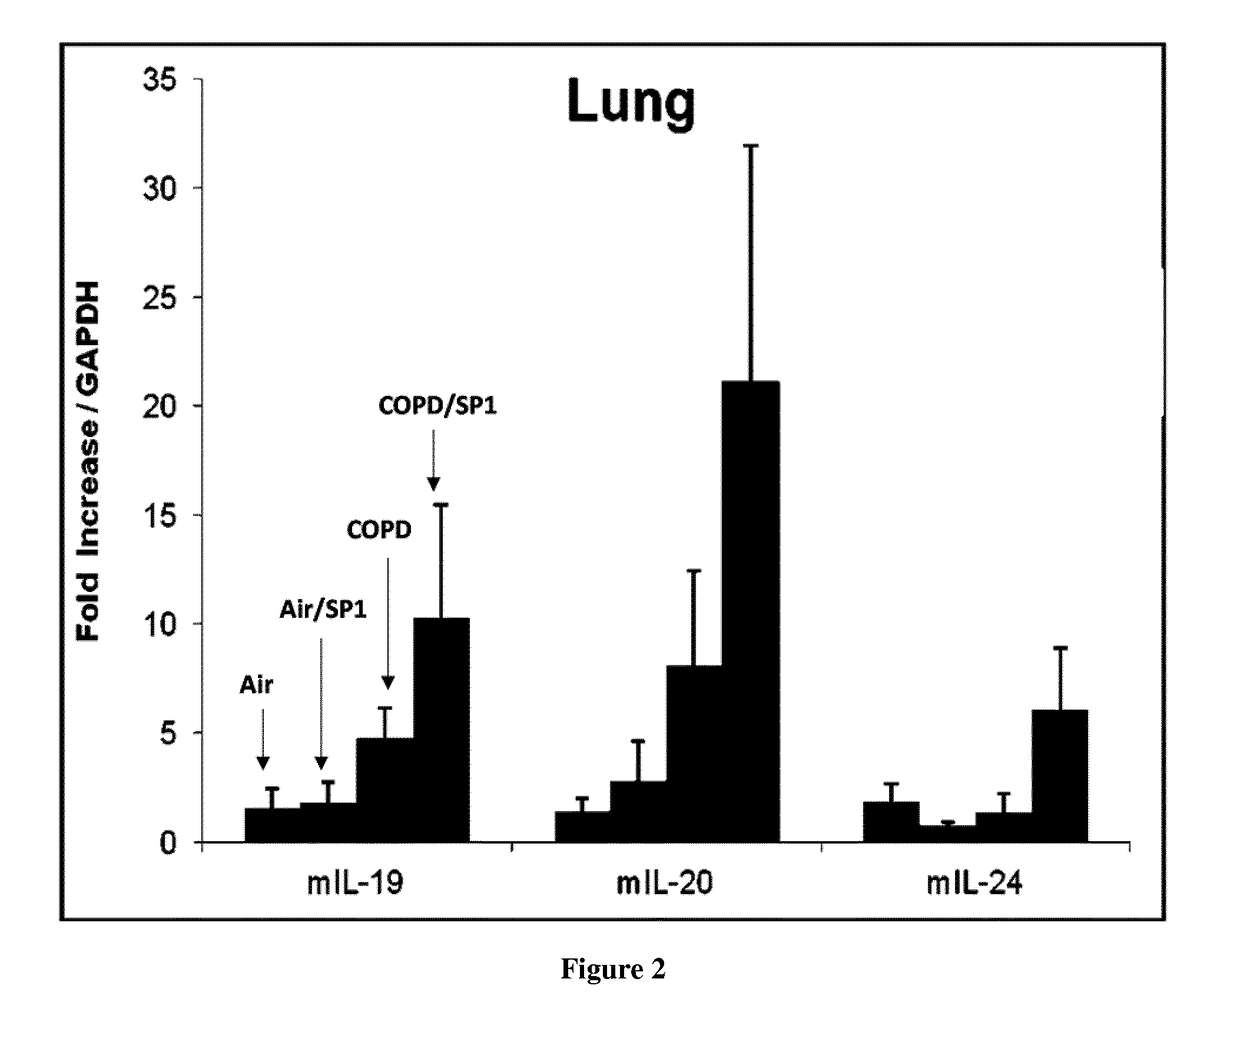 Treatment of acute exacerbations of chronic obstructive pulmonary disease by antagonism of the il-20r